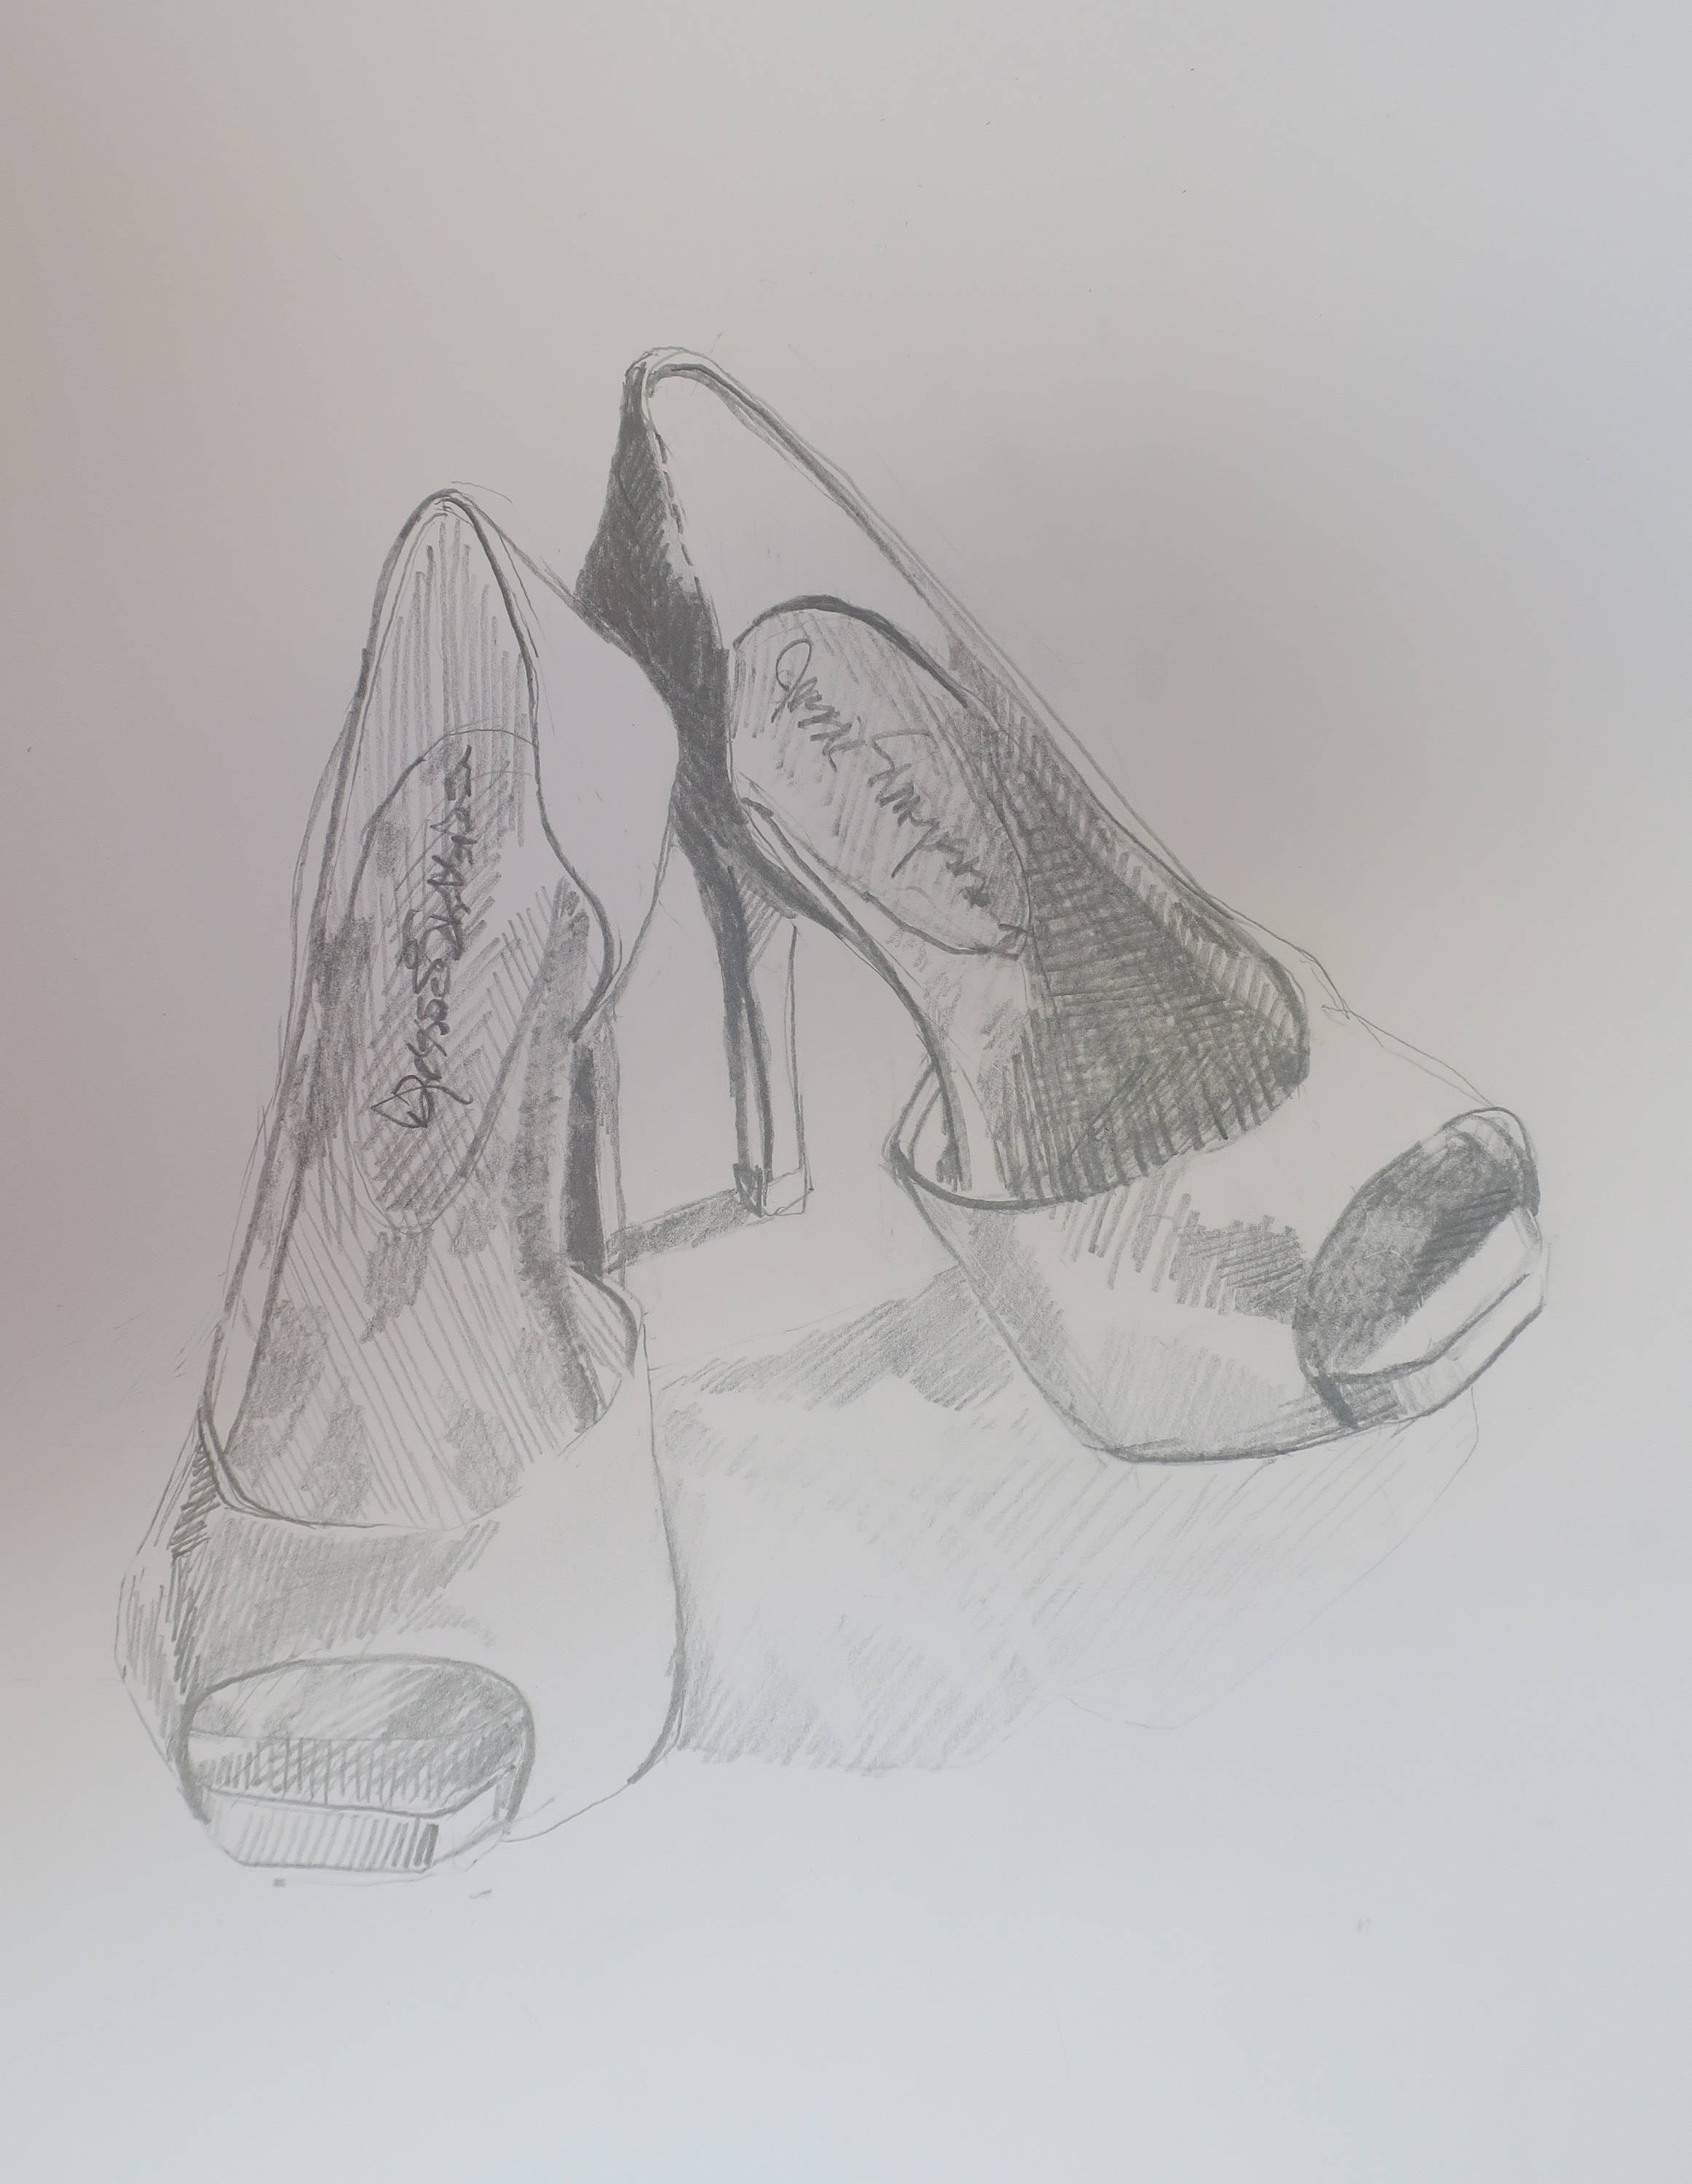 High Heel Shoe Vase Of Graphite Drawing Of Red High Heel Shoes 14 by 11 Inch Etsy with Regard to Dpowiaksz